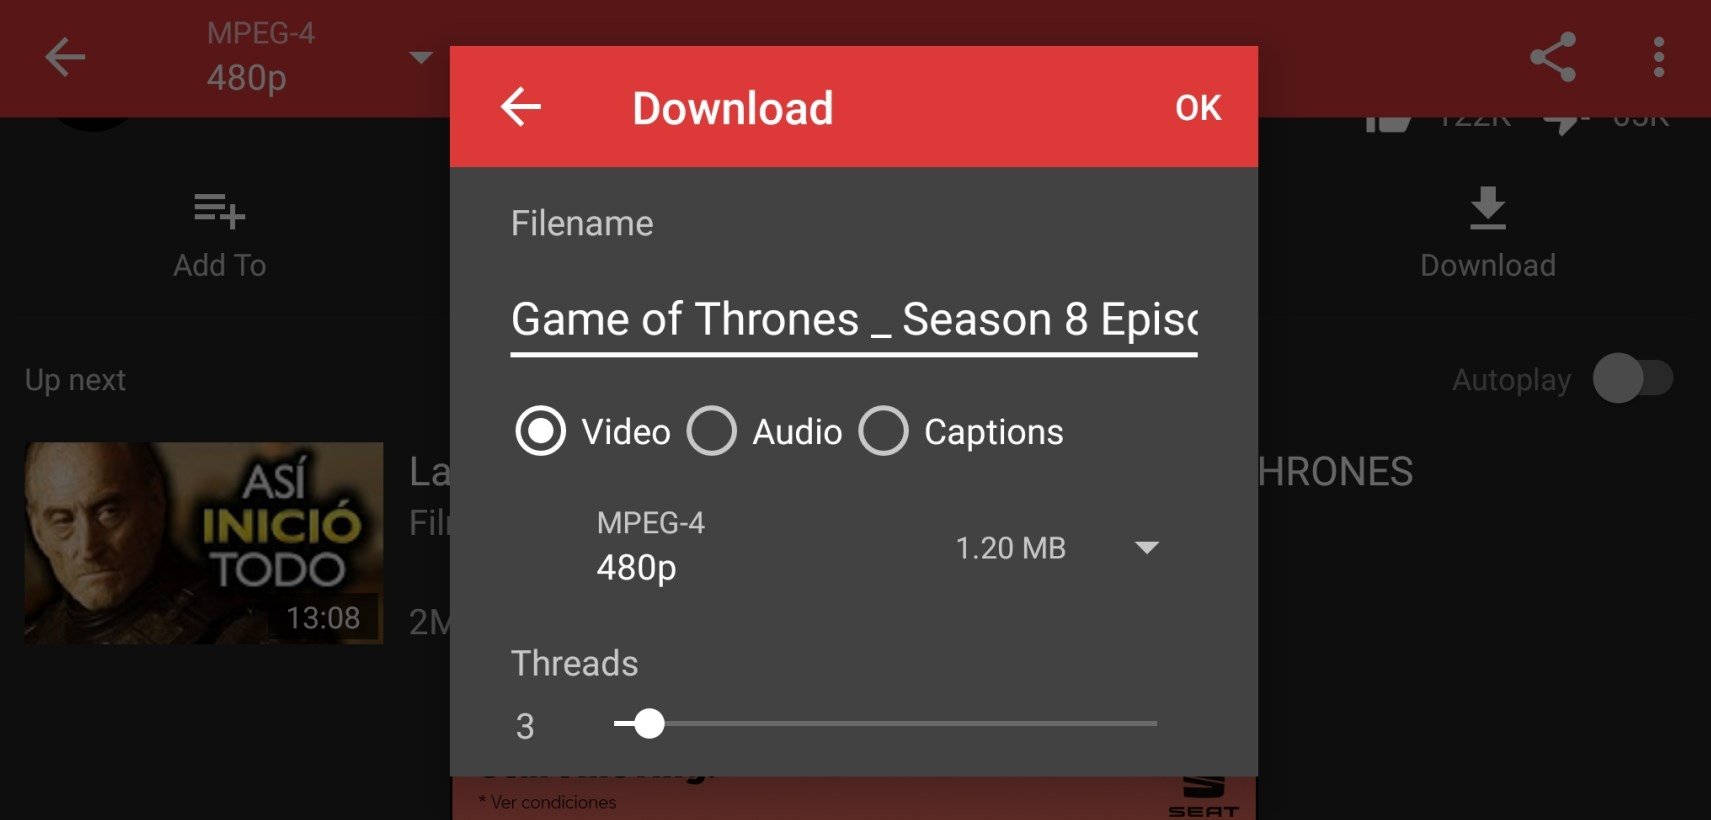 download youtube for android 4.4.2